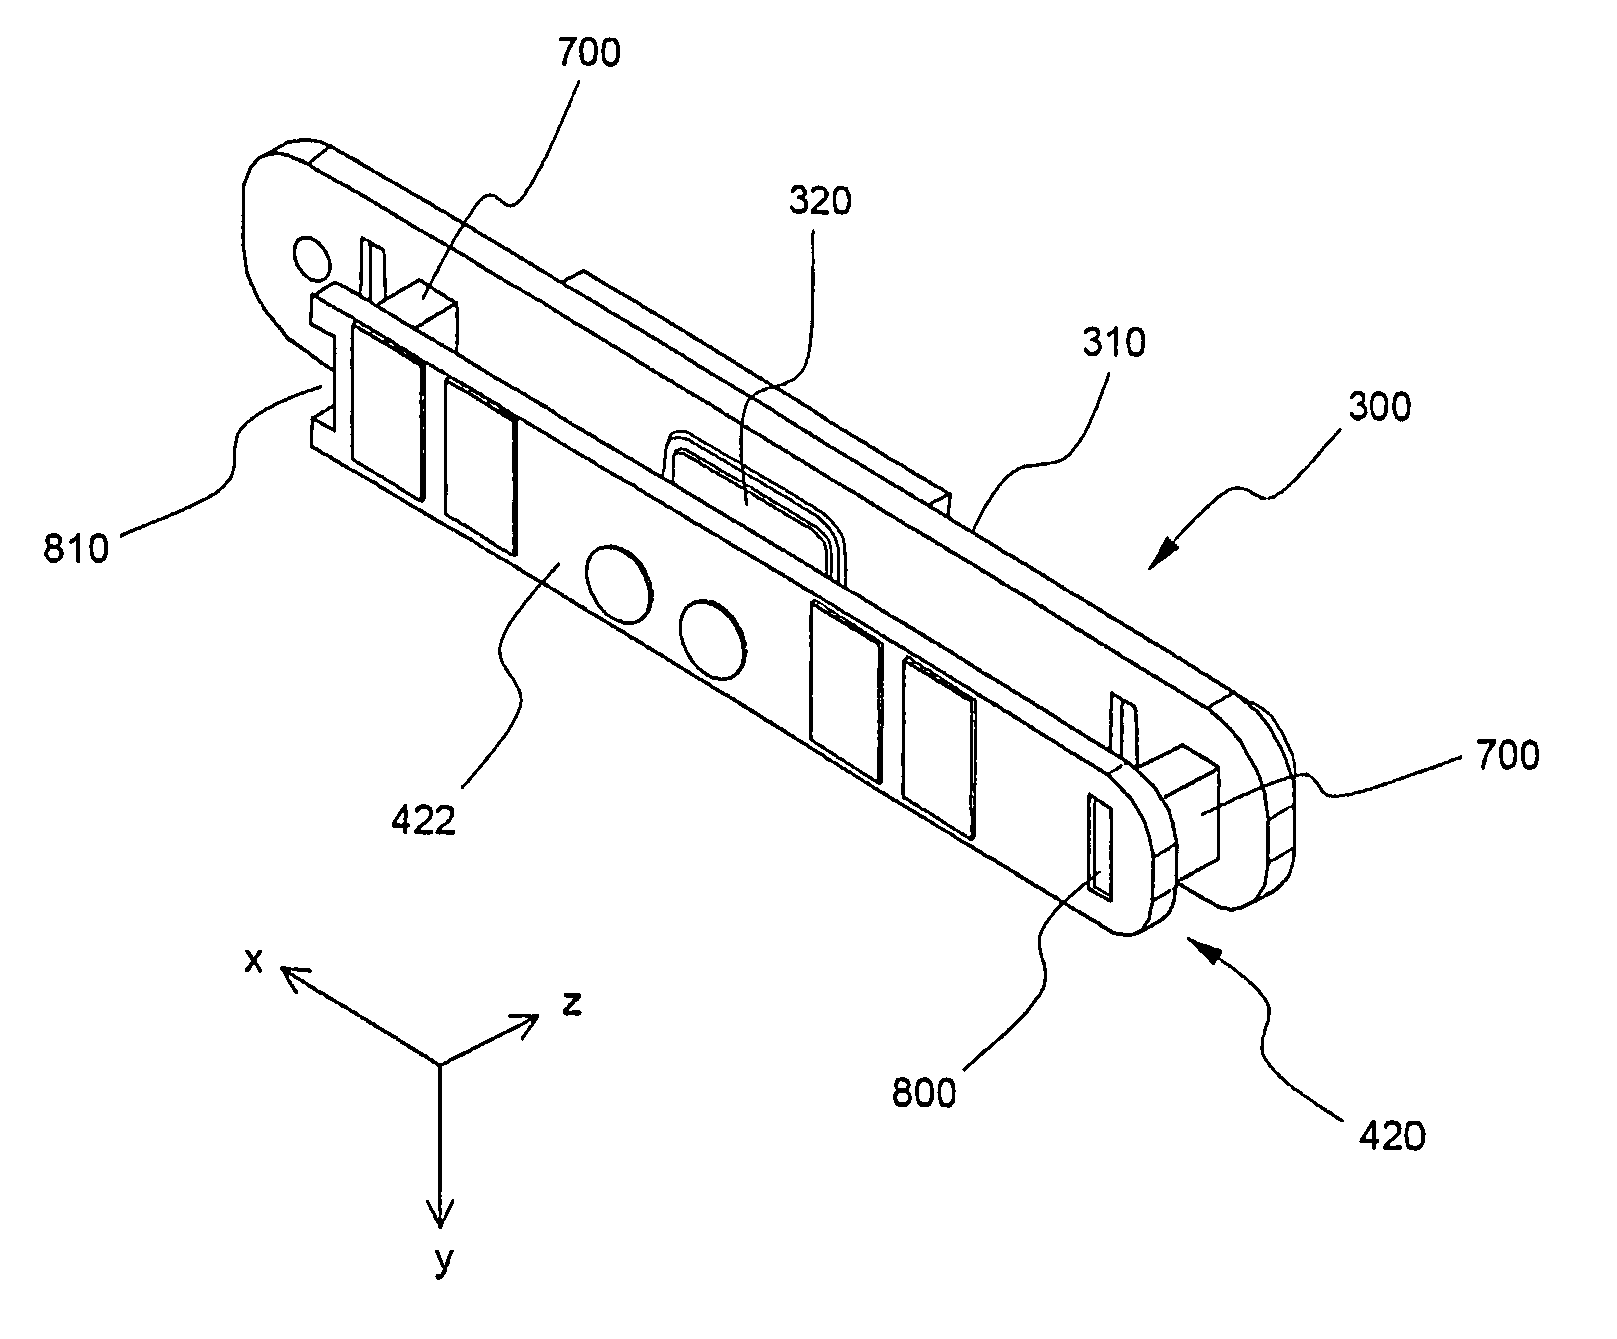 Unification type cap assembly containing protection circuit board and secondary battery comprising the same